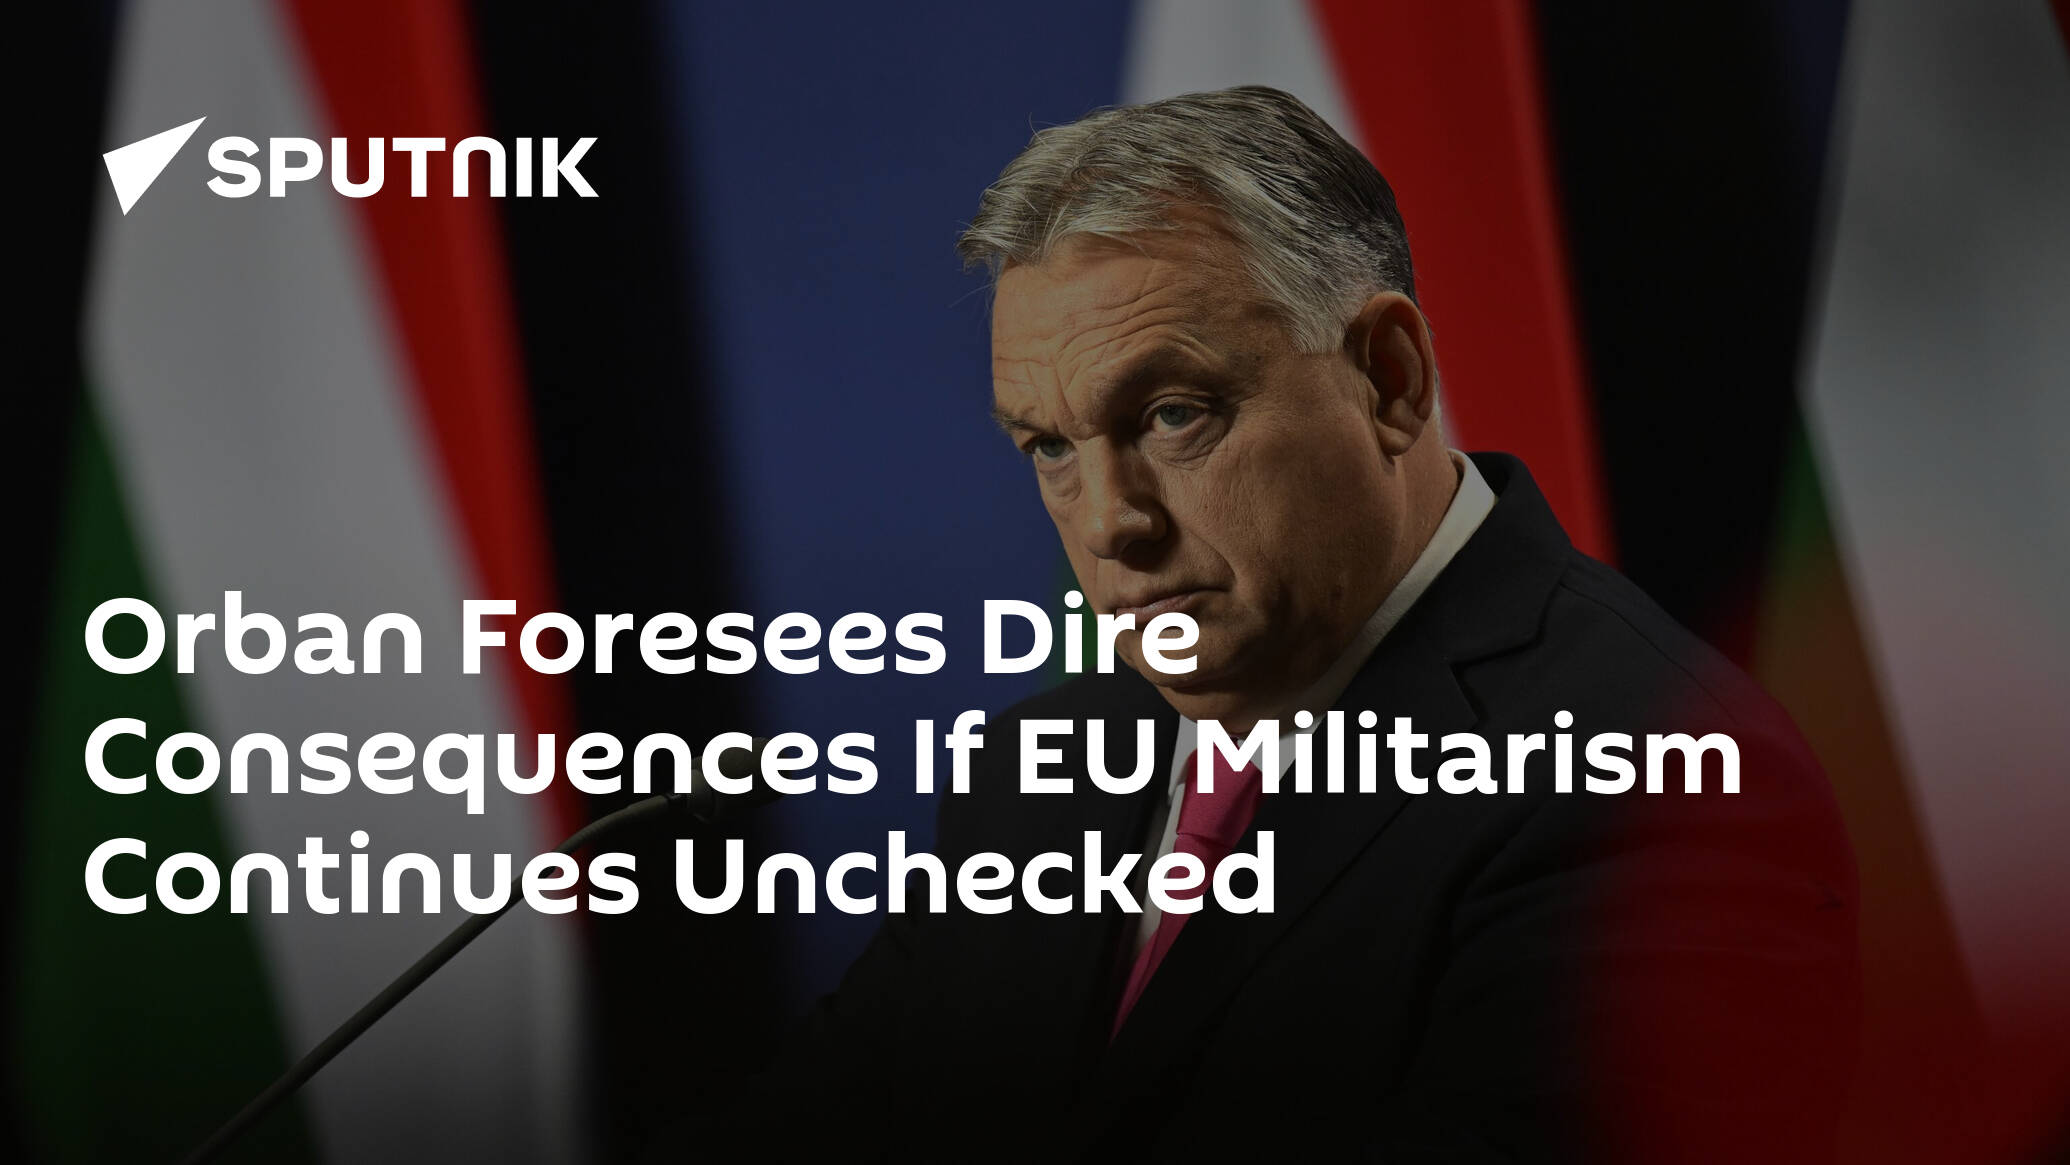 Orban Foresees Dire Consequences If EU Militarism Continues Unchecked